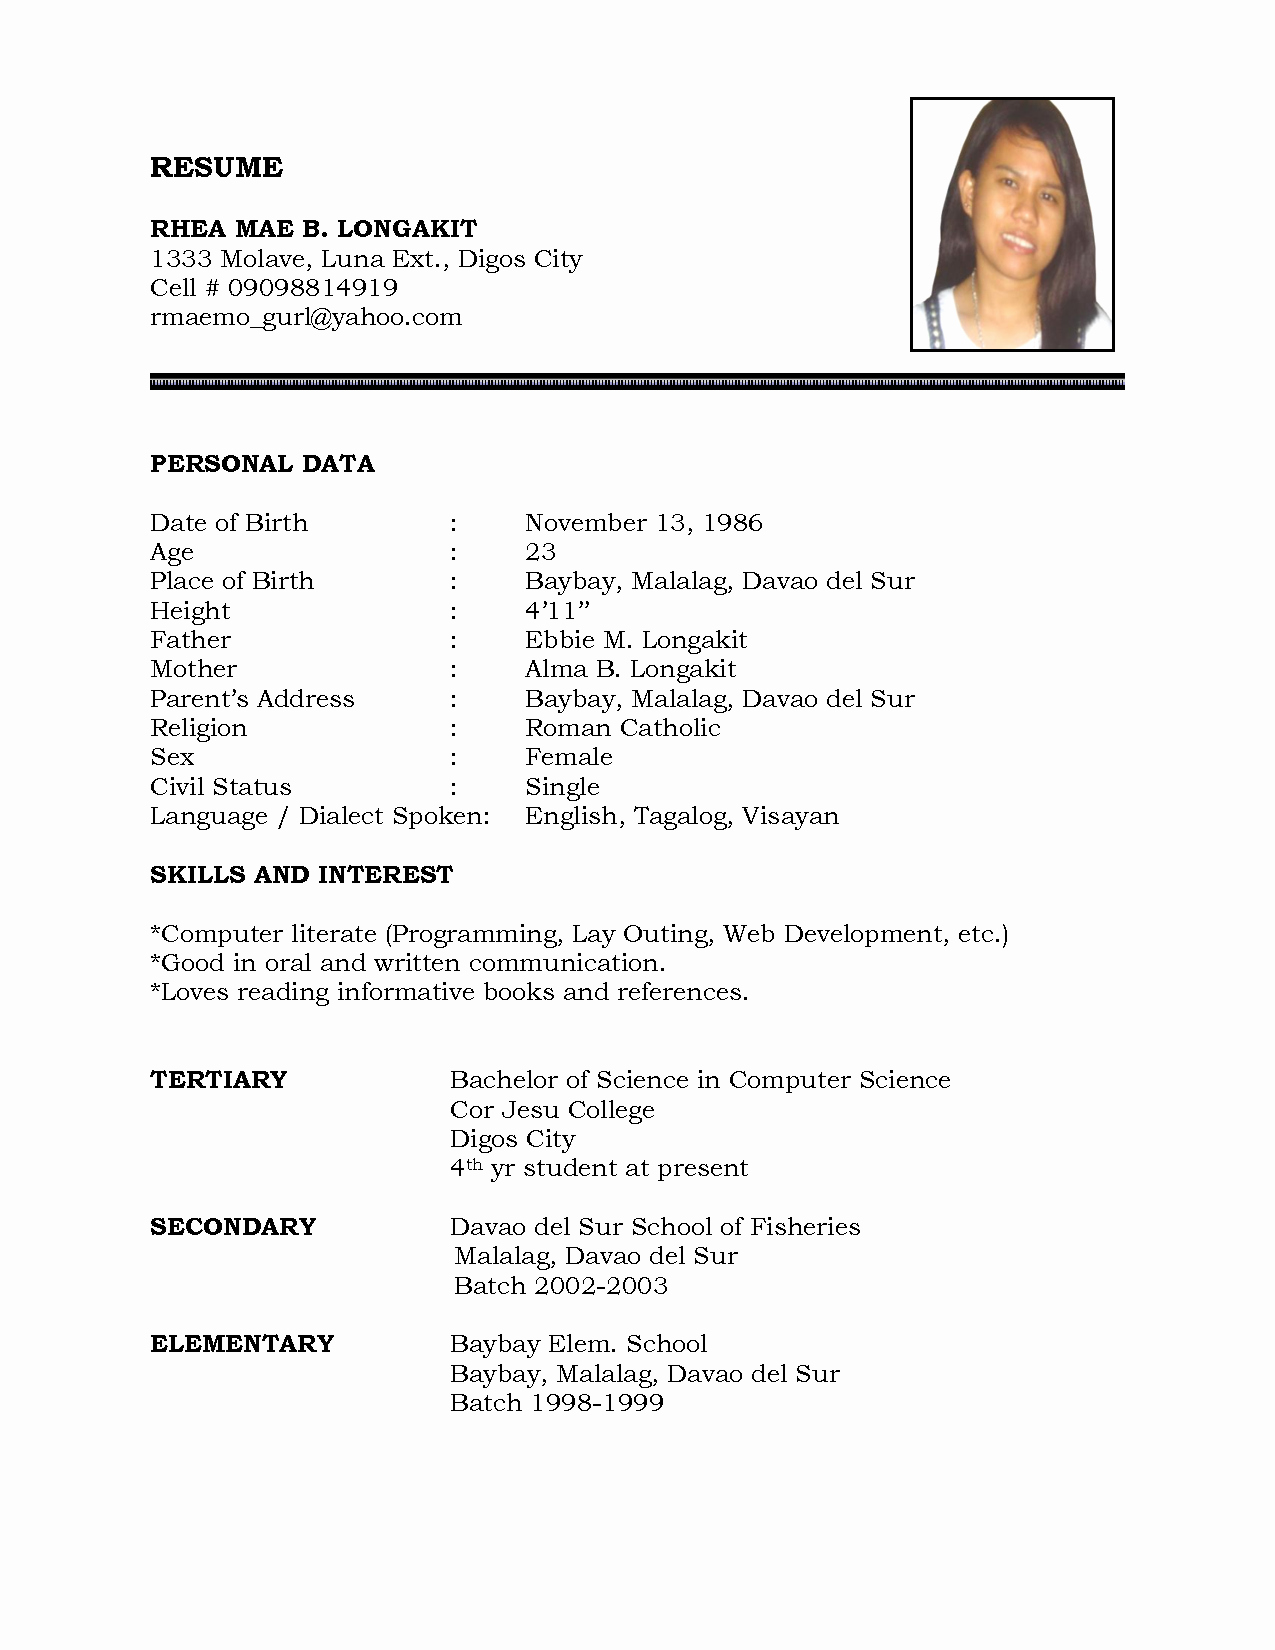 Professional Resumes are Your Key to Success Resume Cv